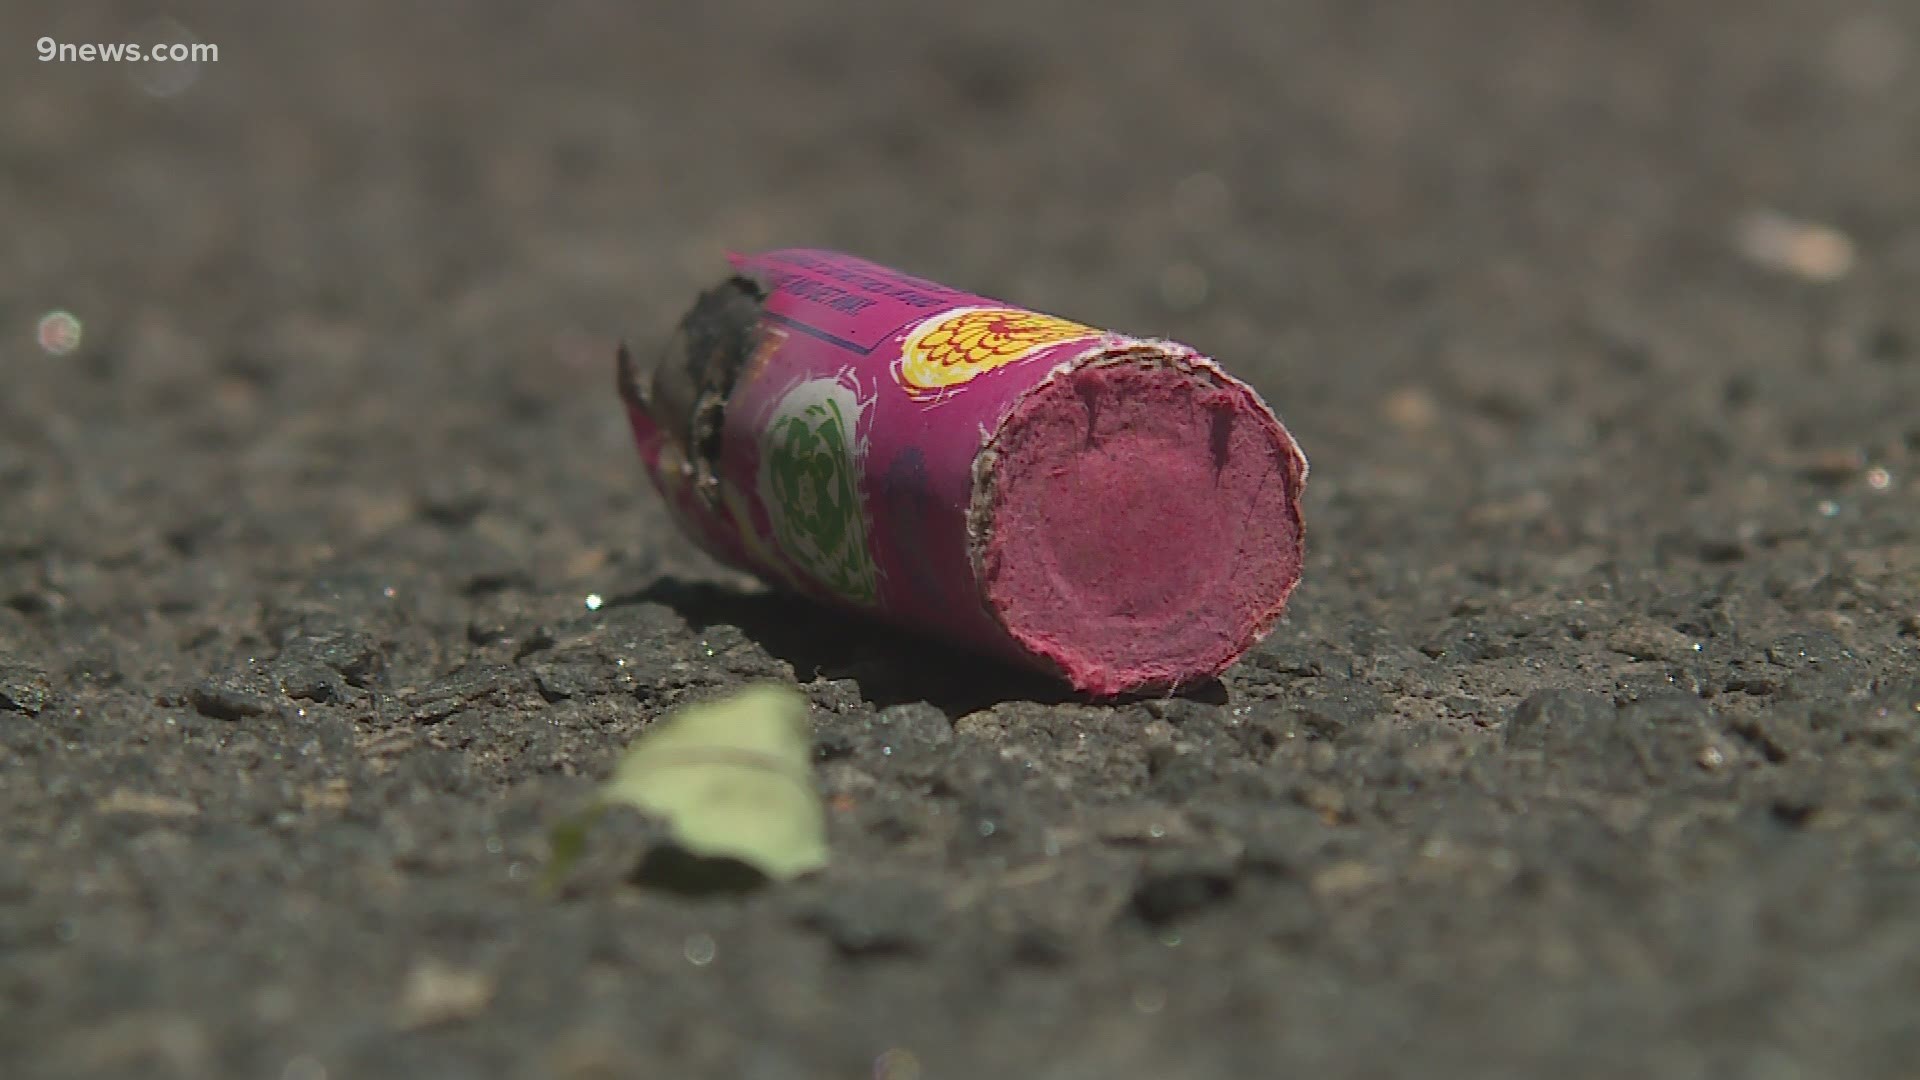 A South Metro Fire Rescue spokesperson told 9NEWS legal and illegal fireworks were to blame for the incidents they responded to on Sunday night.